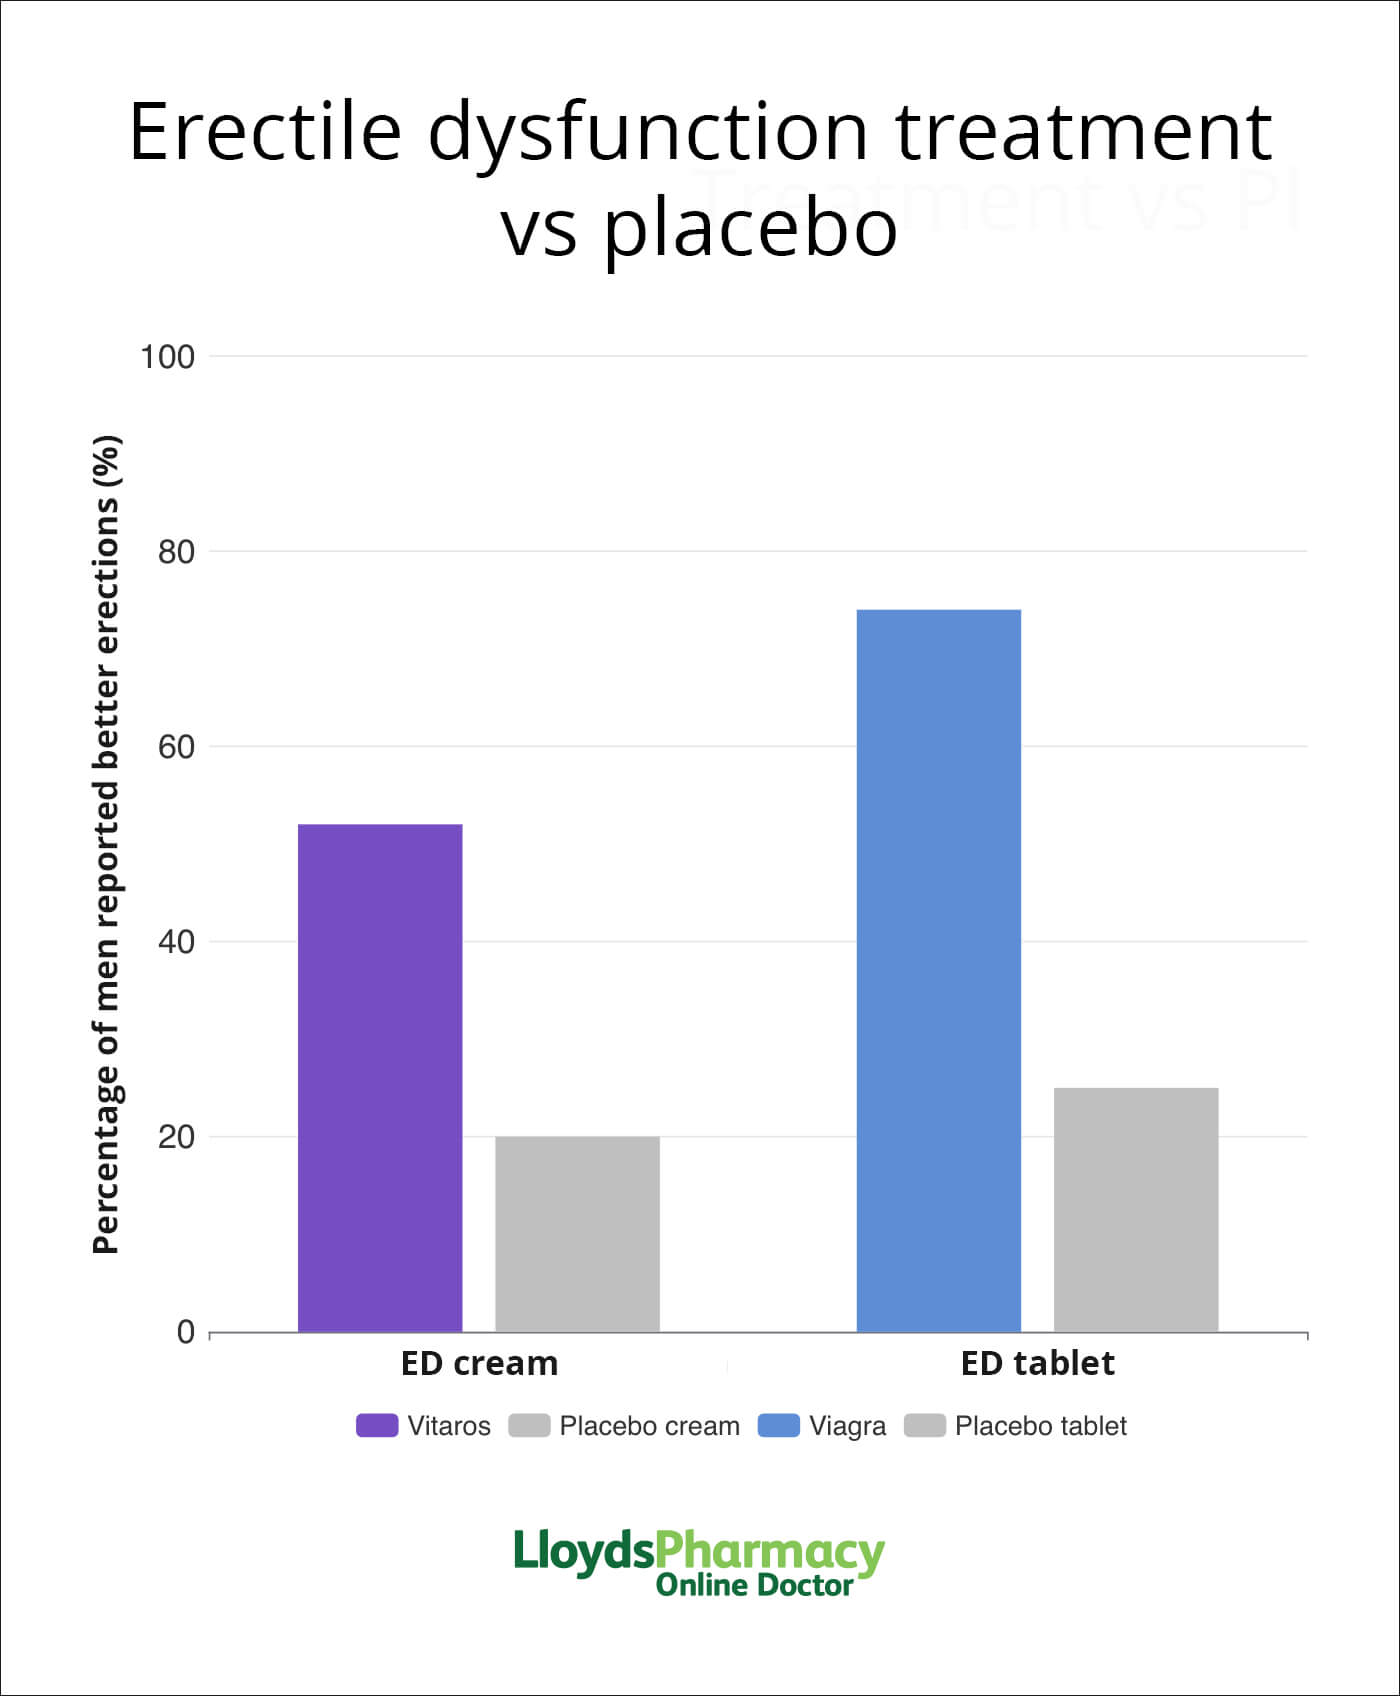 Erectile dysfunction cream and tablets vs placebo